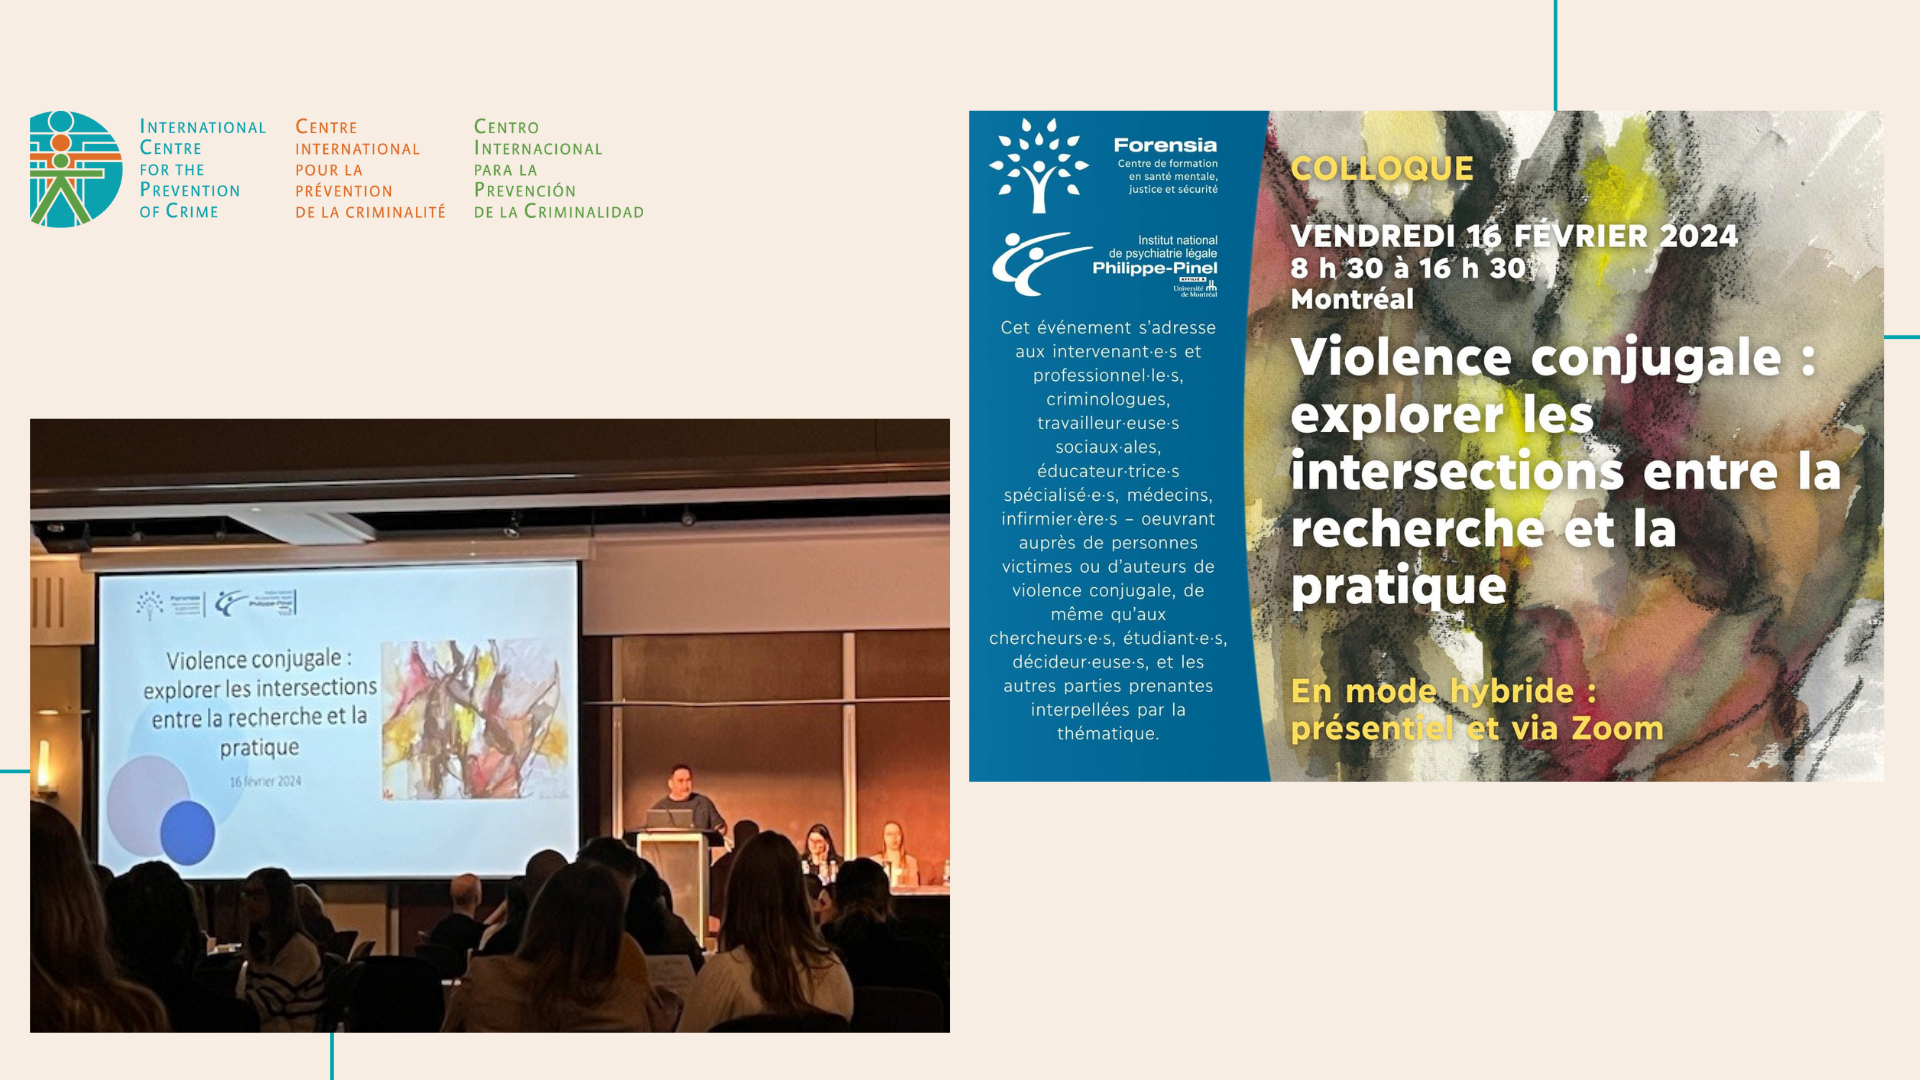 The ICPC took part in the 2nd Forensia conference on domestic violence